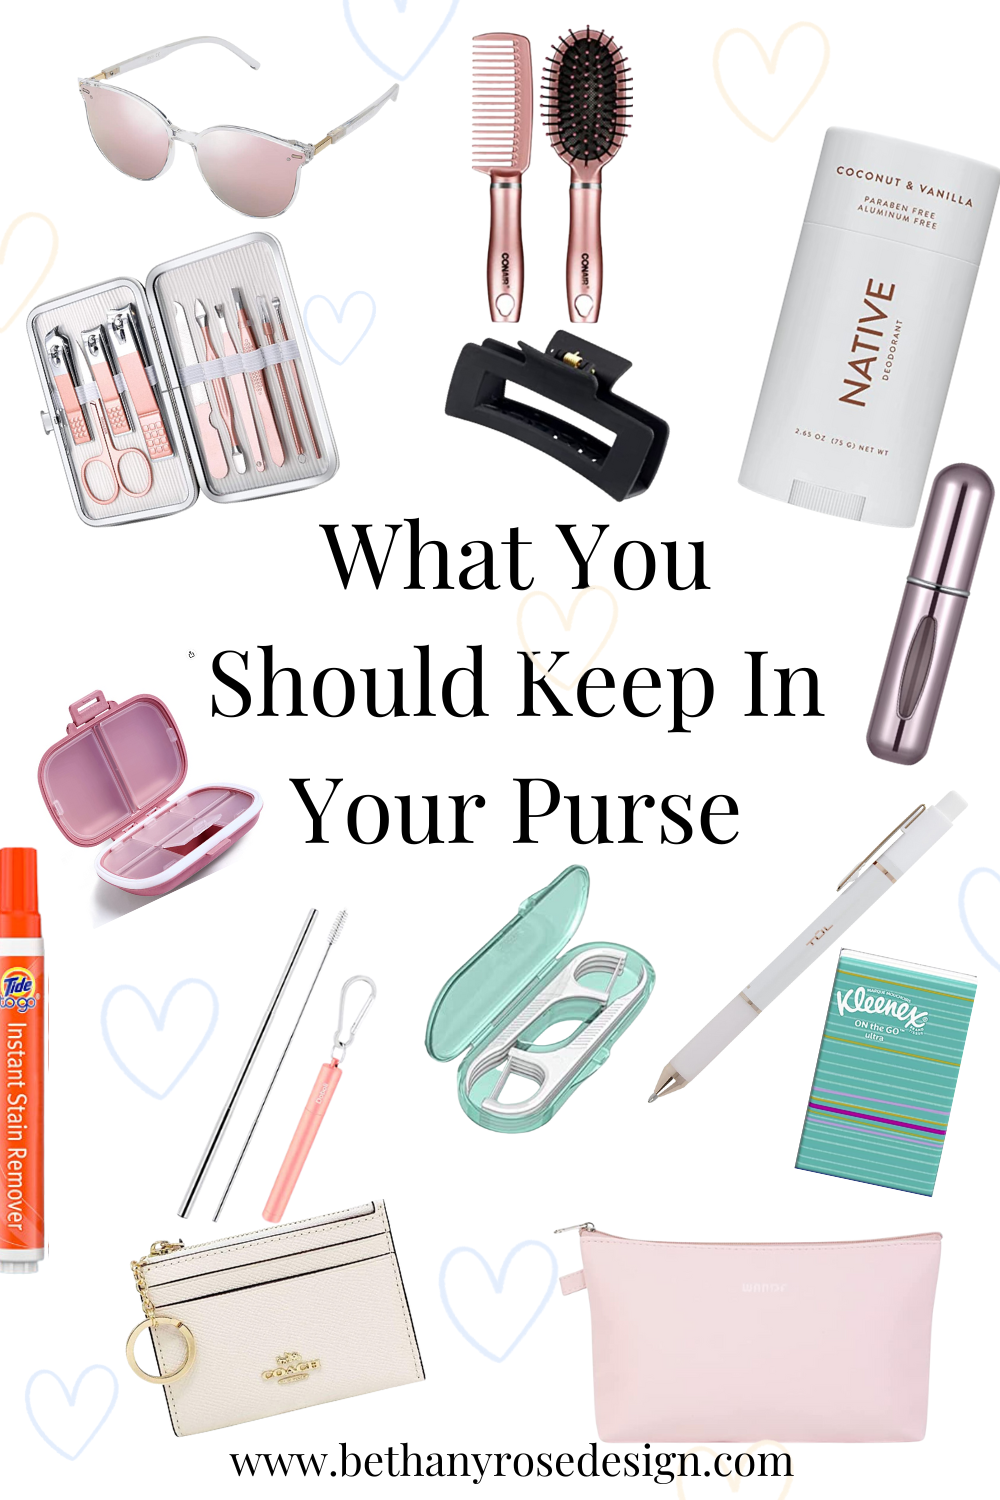 What You Should Keep In Your Purse